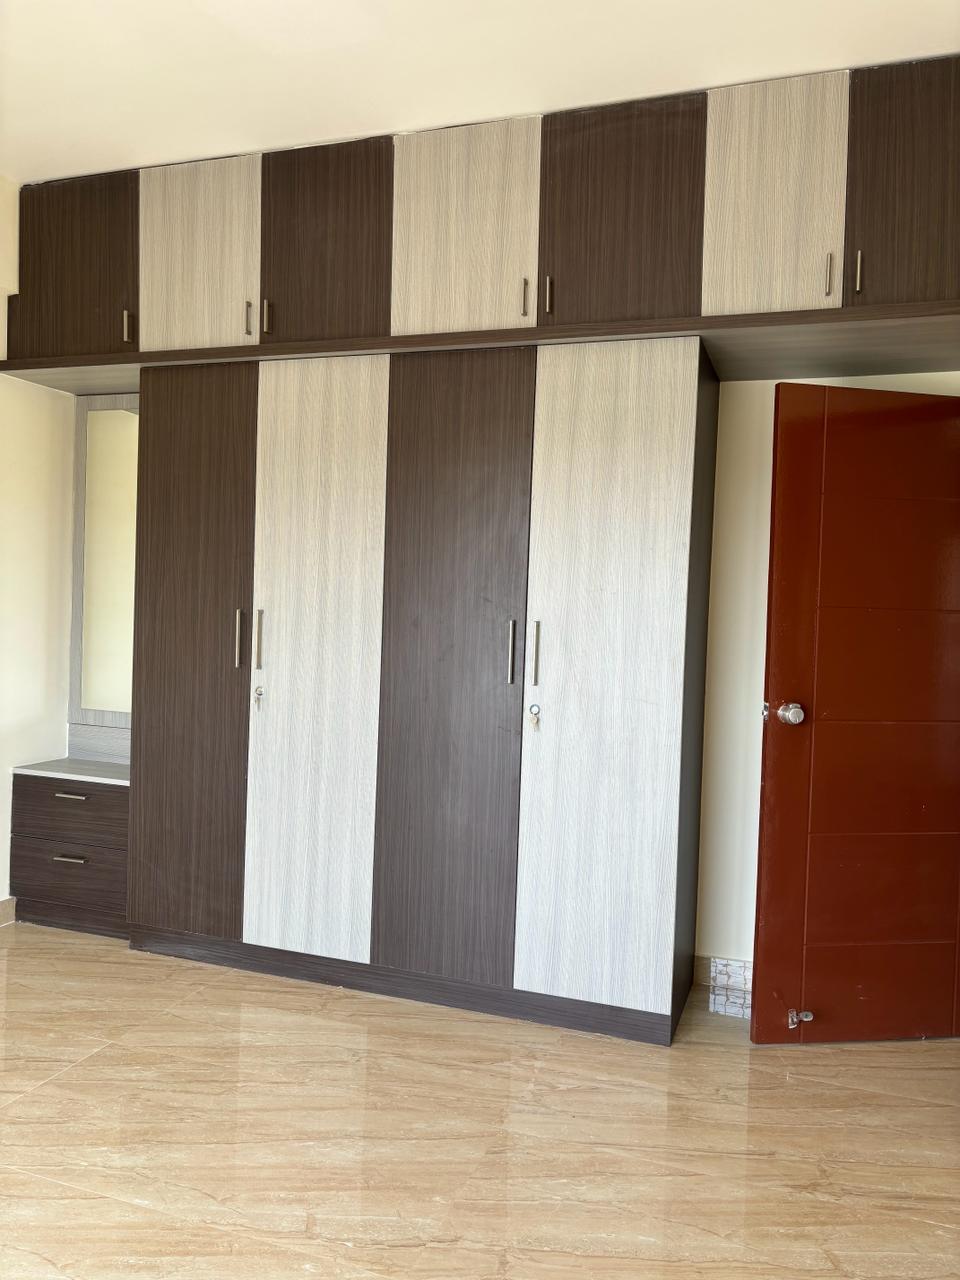 3 BHK Residential Apartment for Lease Only in Kothanur